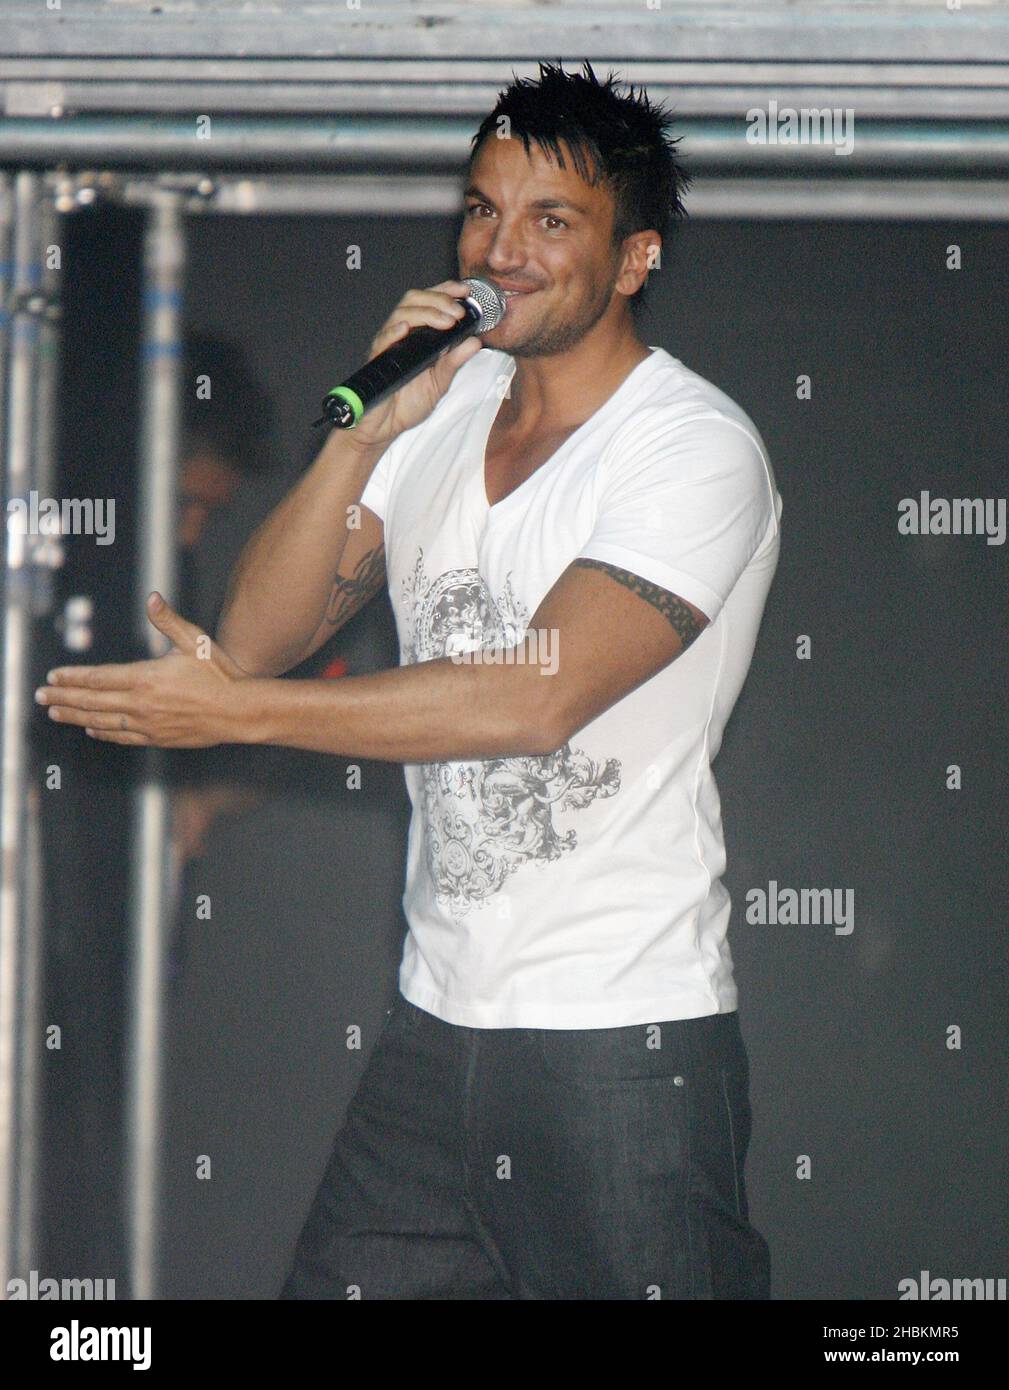 Peter Andre introduces 'Here Come the Boys', a show choreographed by Jennifer Lopez's ex-husband, Cris Judd, at the Indigo2 in The 02 Arena, London. Stock Photo